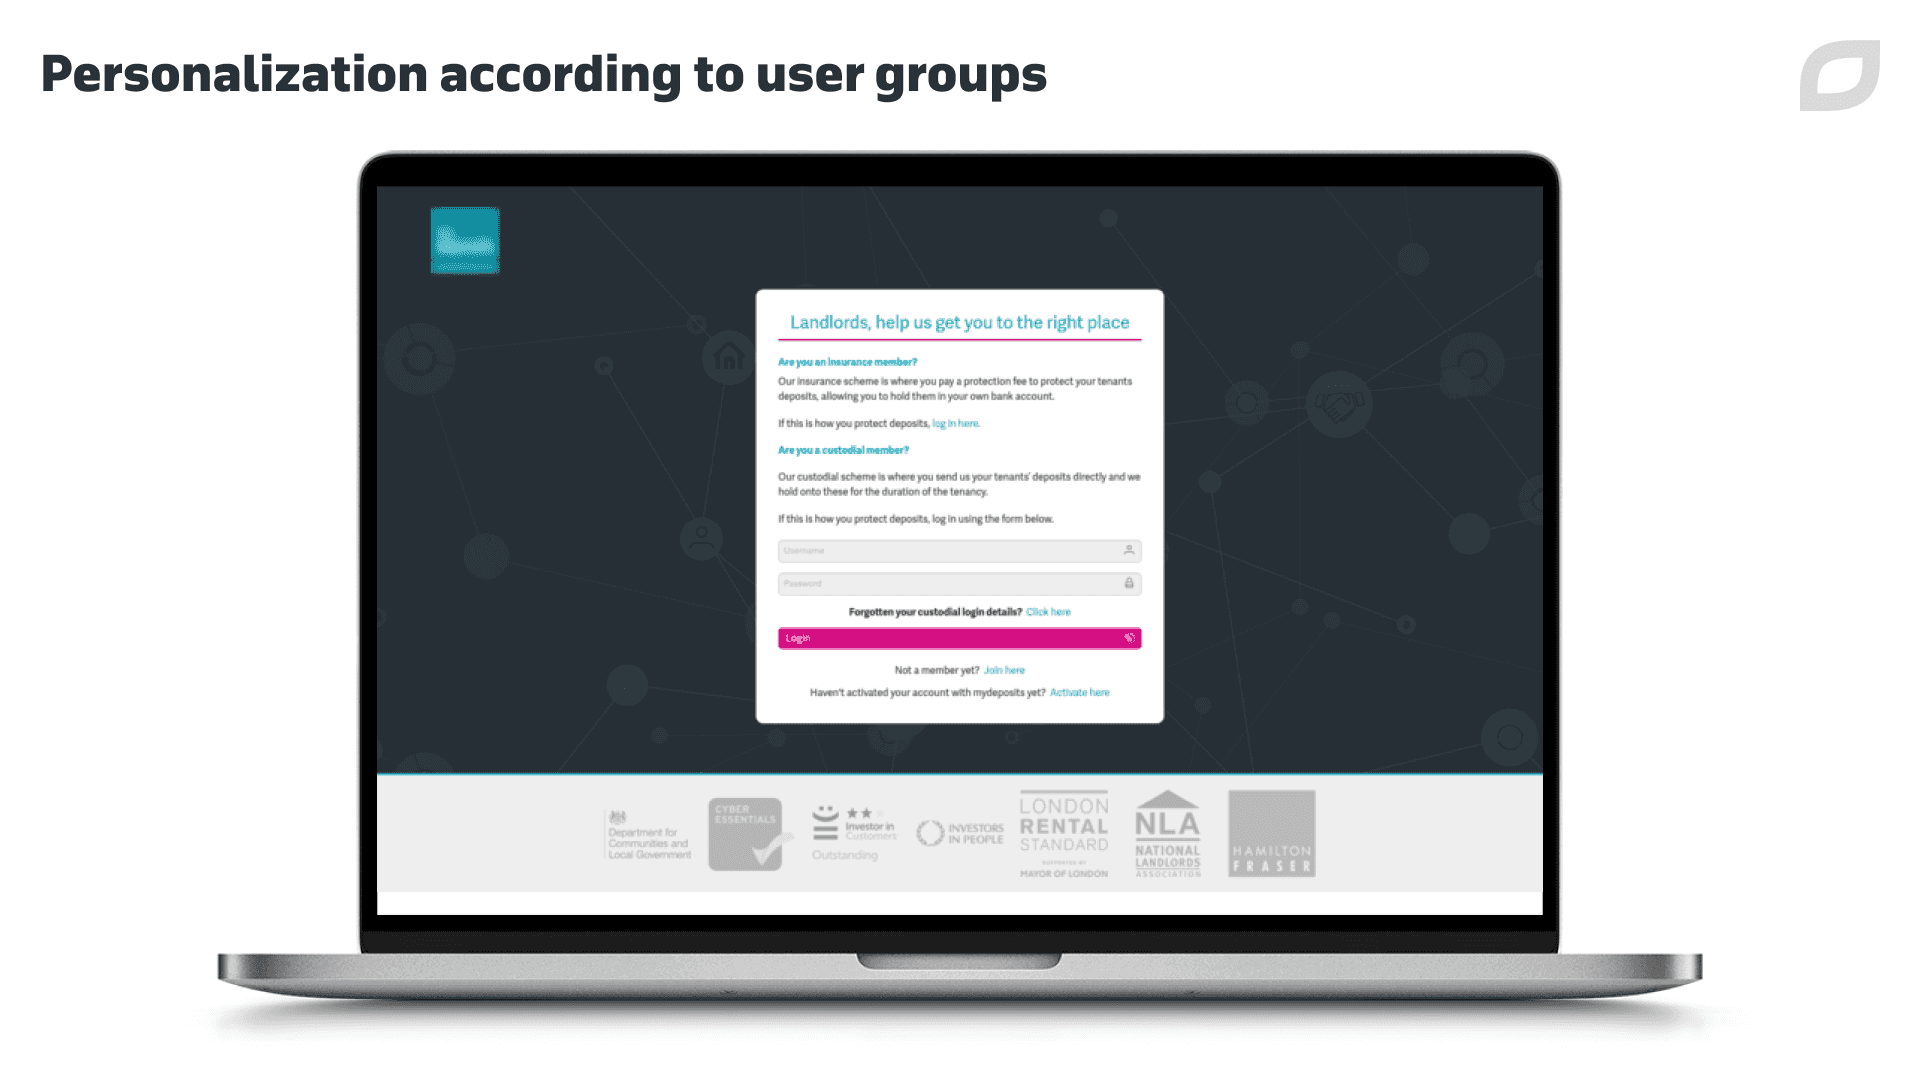 Personalization according to user groups